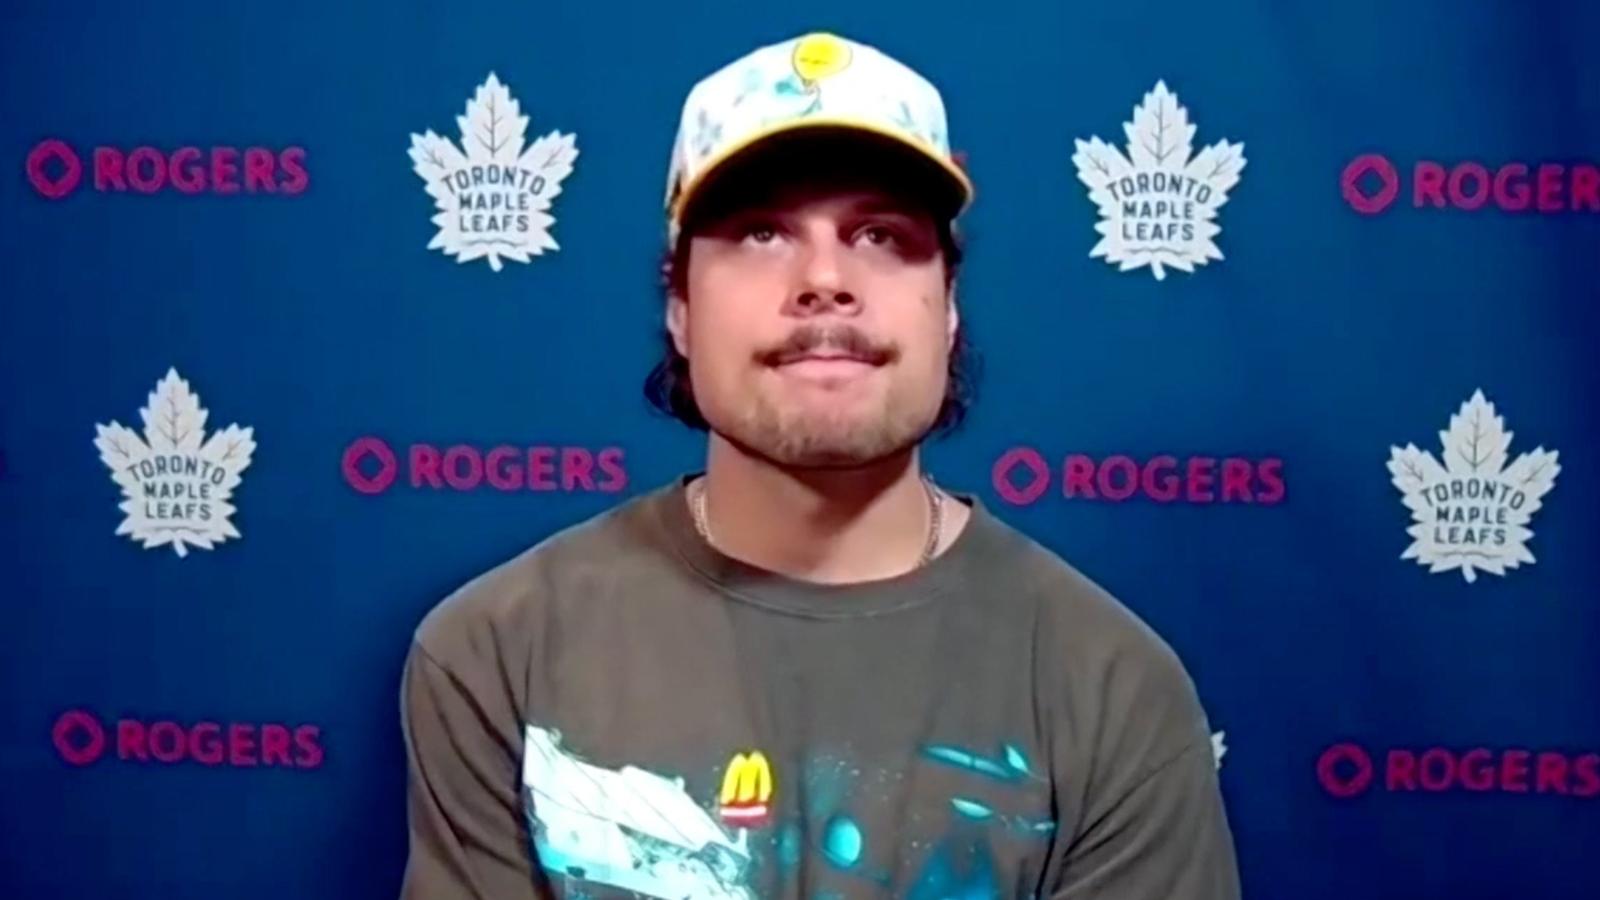 Matthews comes to the defense of Marner, refuses to see him get traded! 